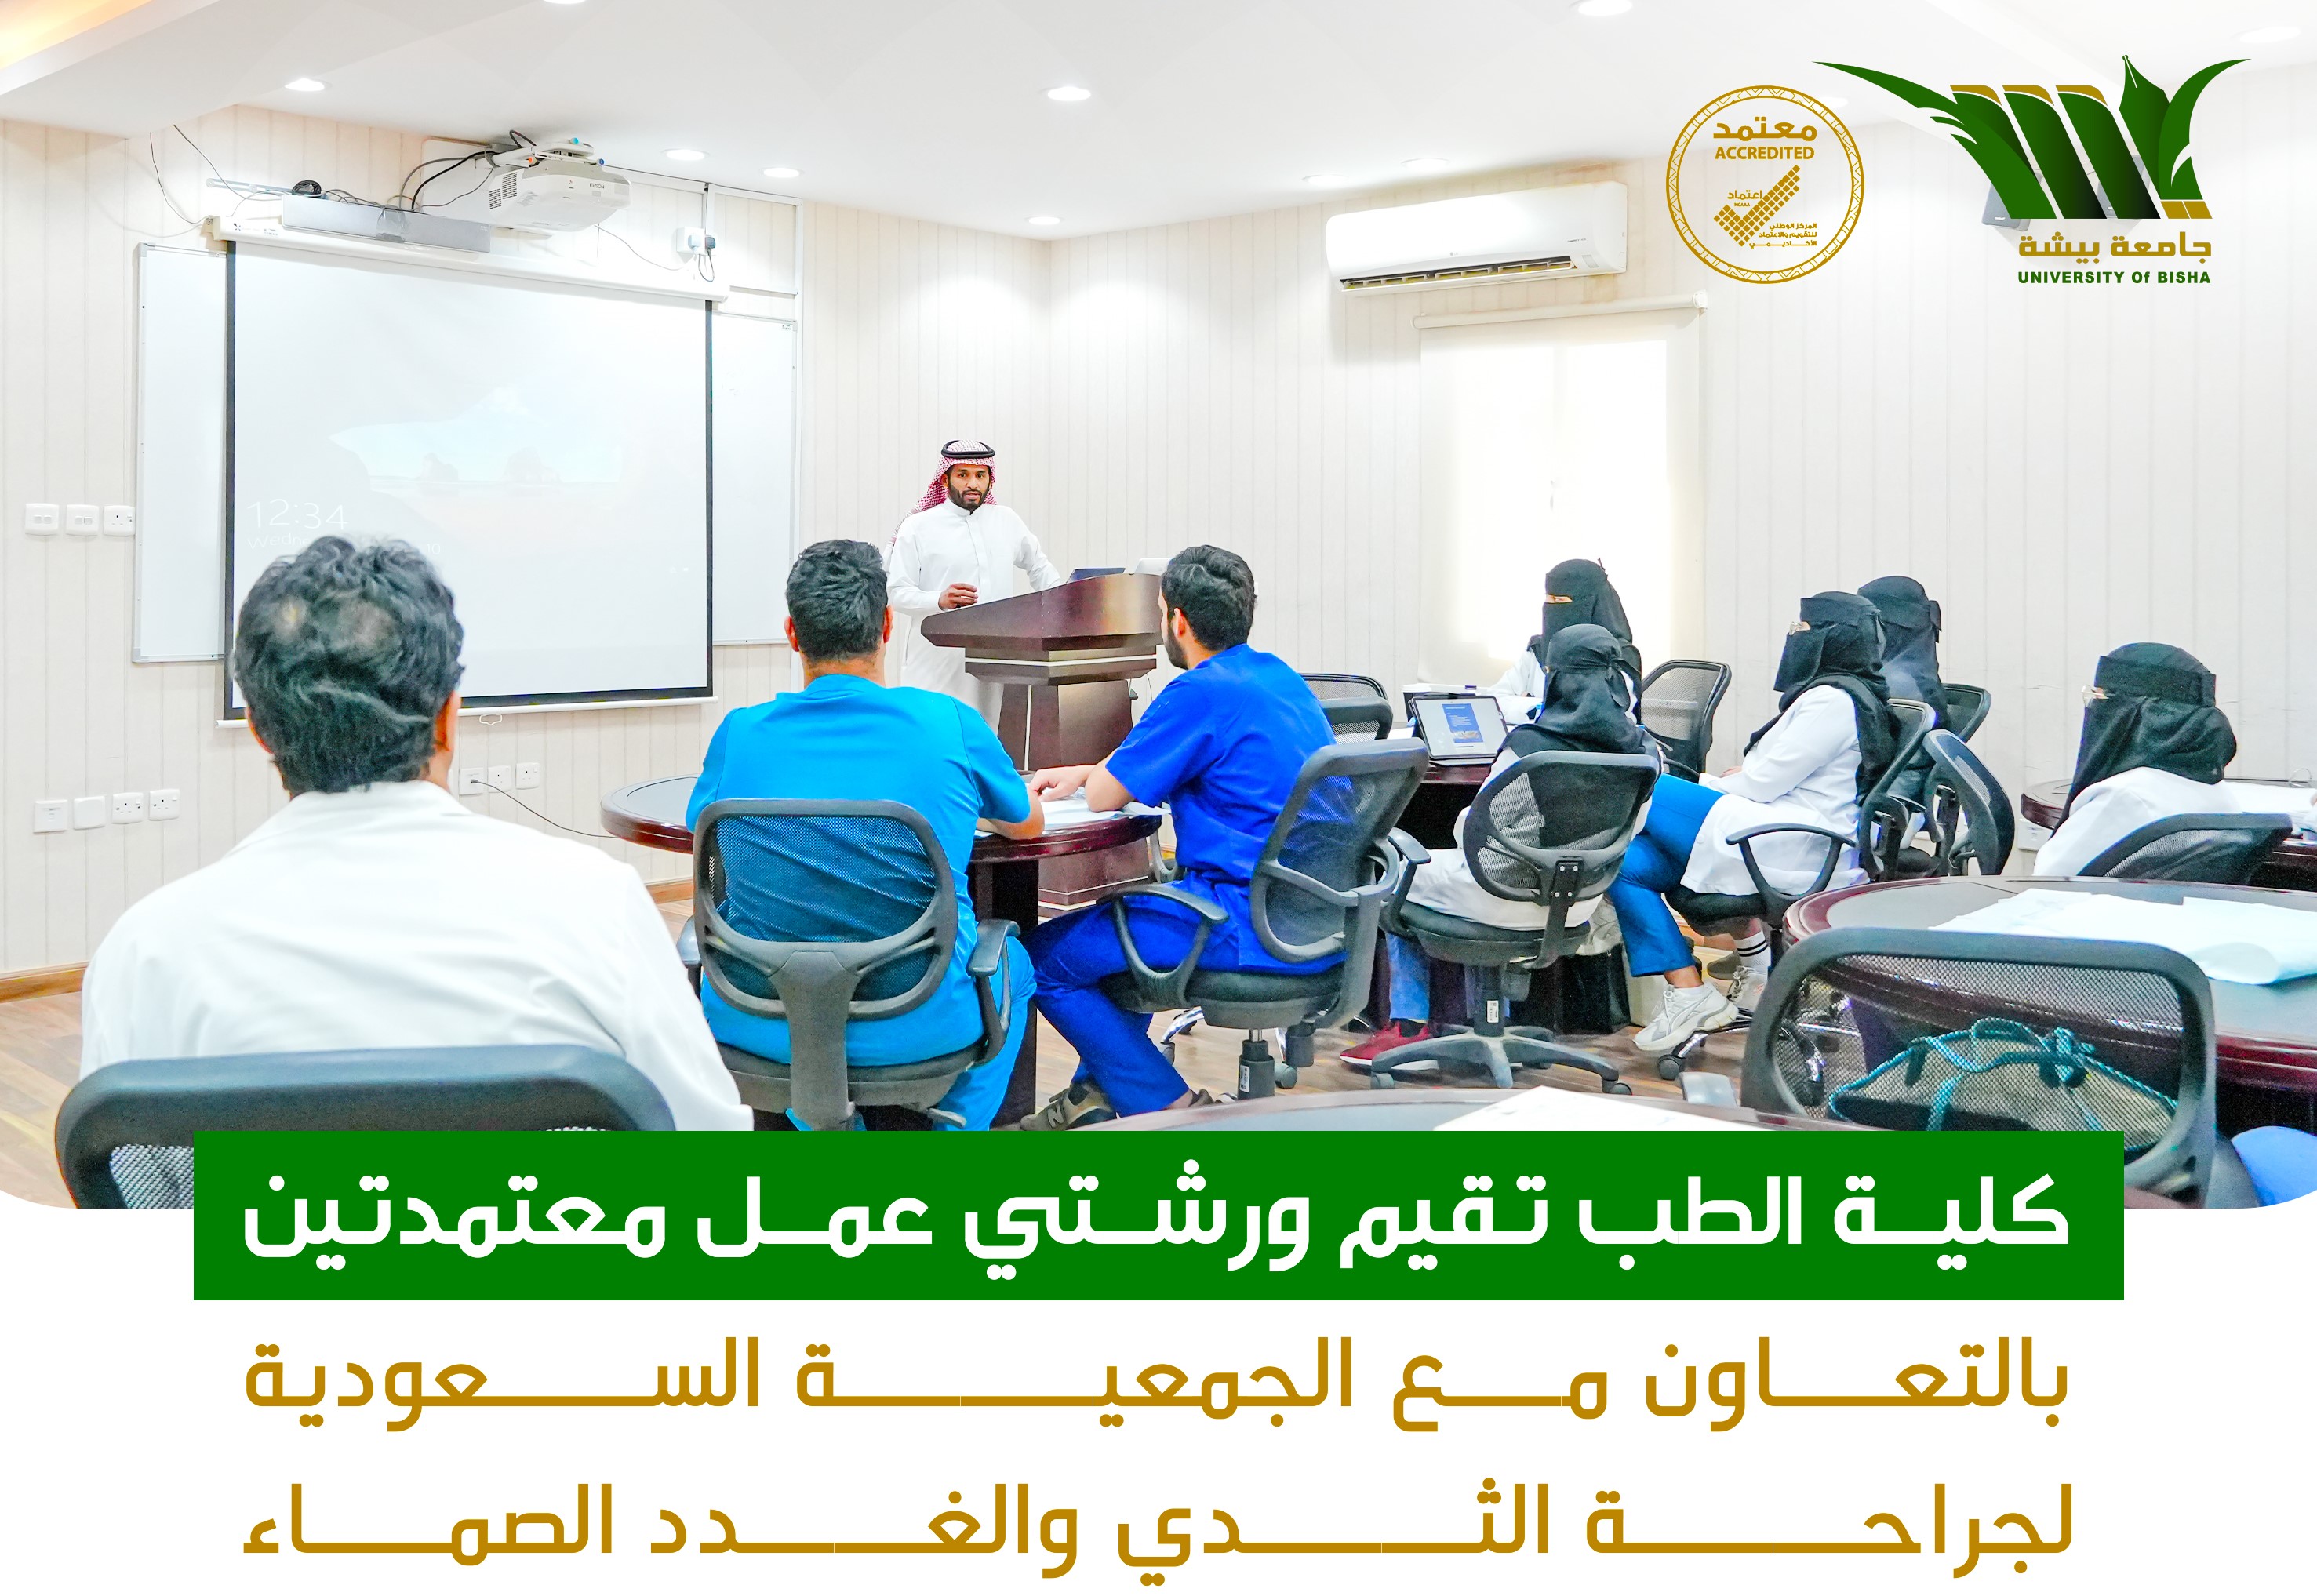 The College of Medicine holds two accredited workshops in cooperation with the Saudi Society for Breast Surgery and Endocrinology